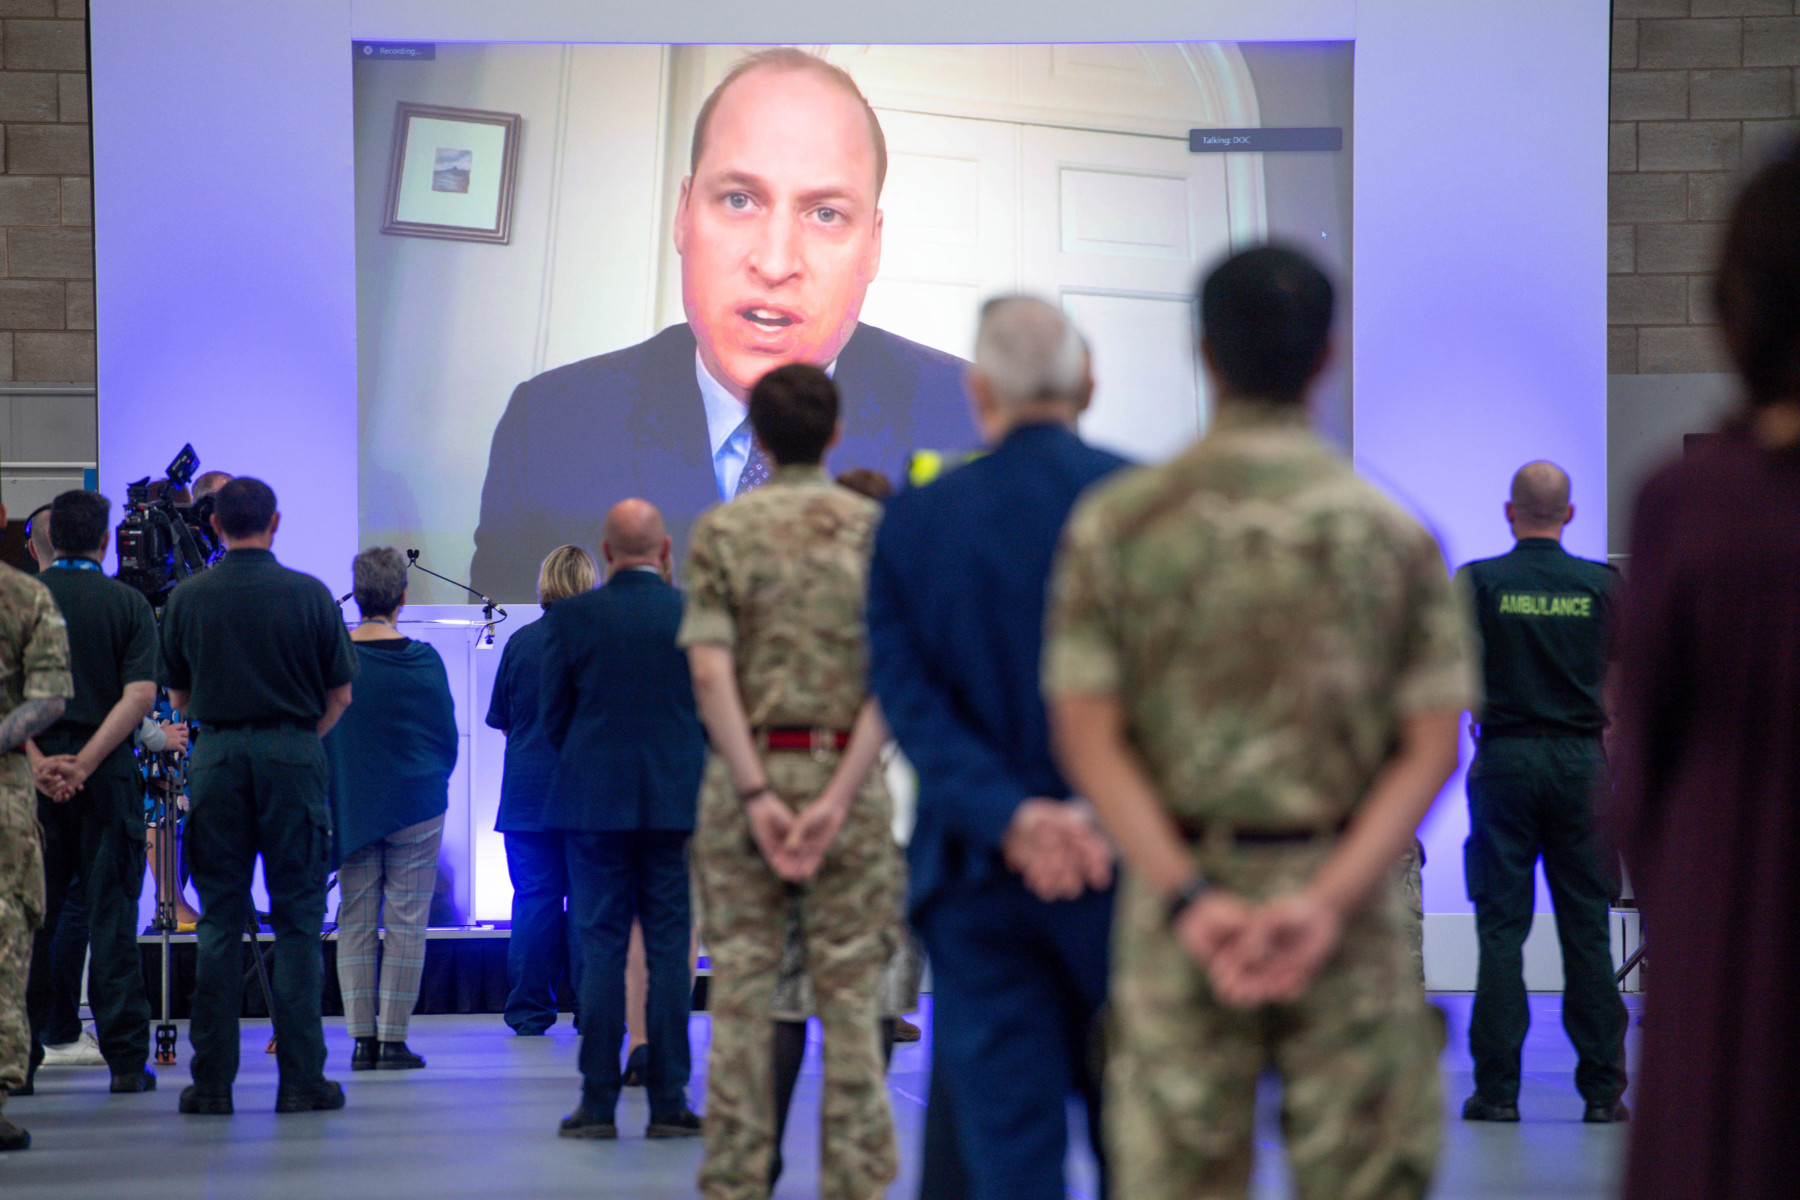 Prince William opened the new hospital in Birmingham via video link